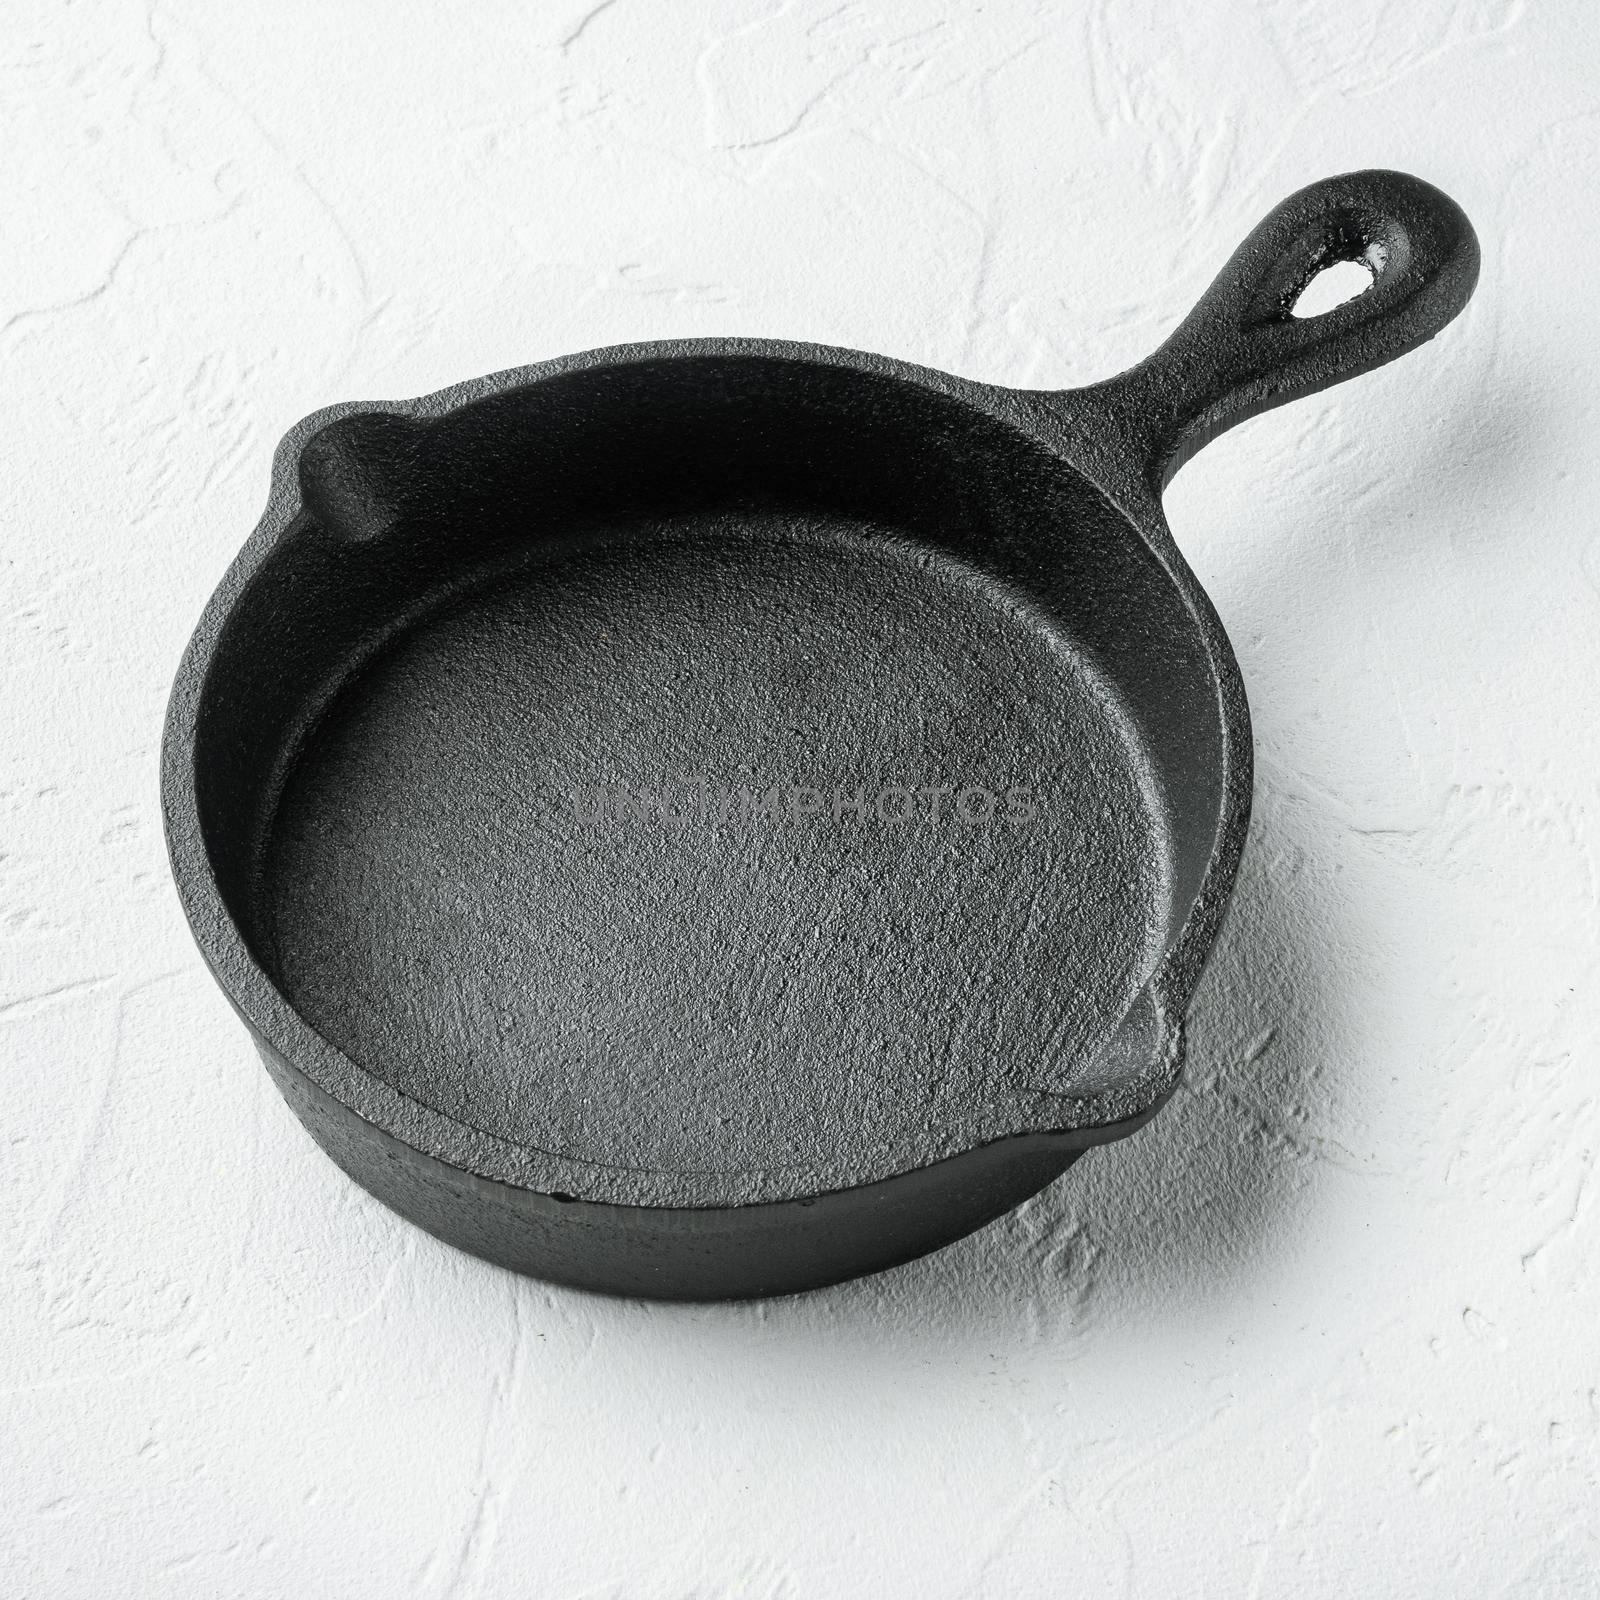 Kitchenware frying cast iron pan, on white stone surface, square format by Ilianesolenyi